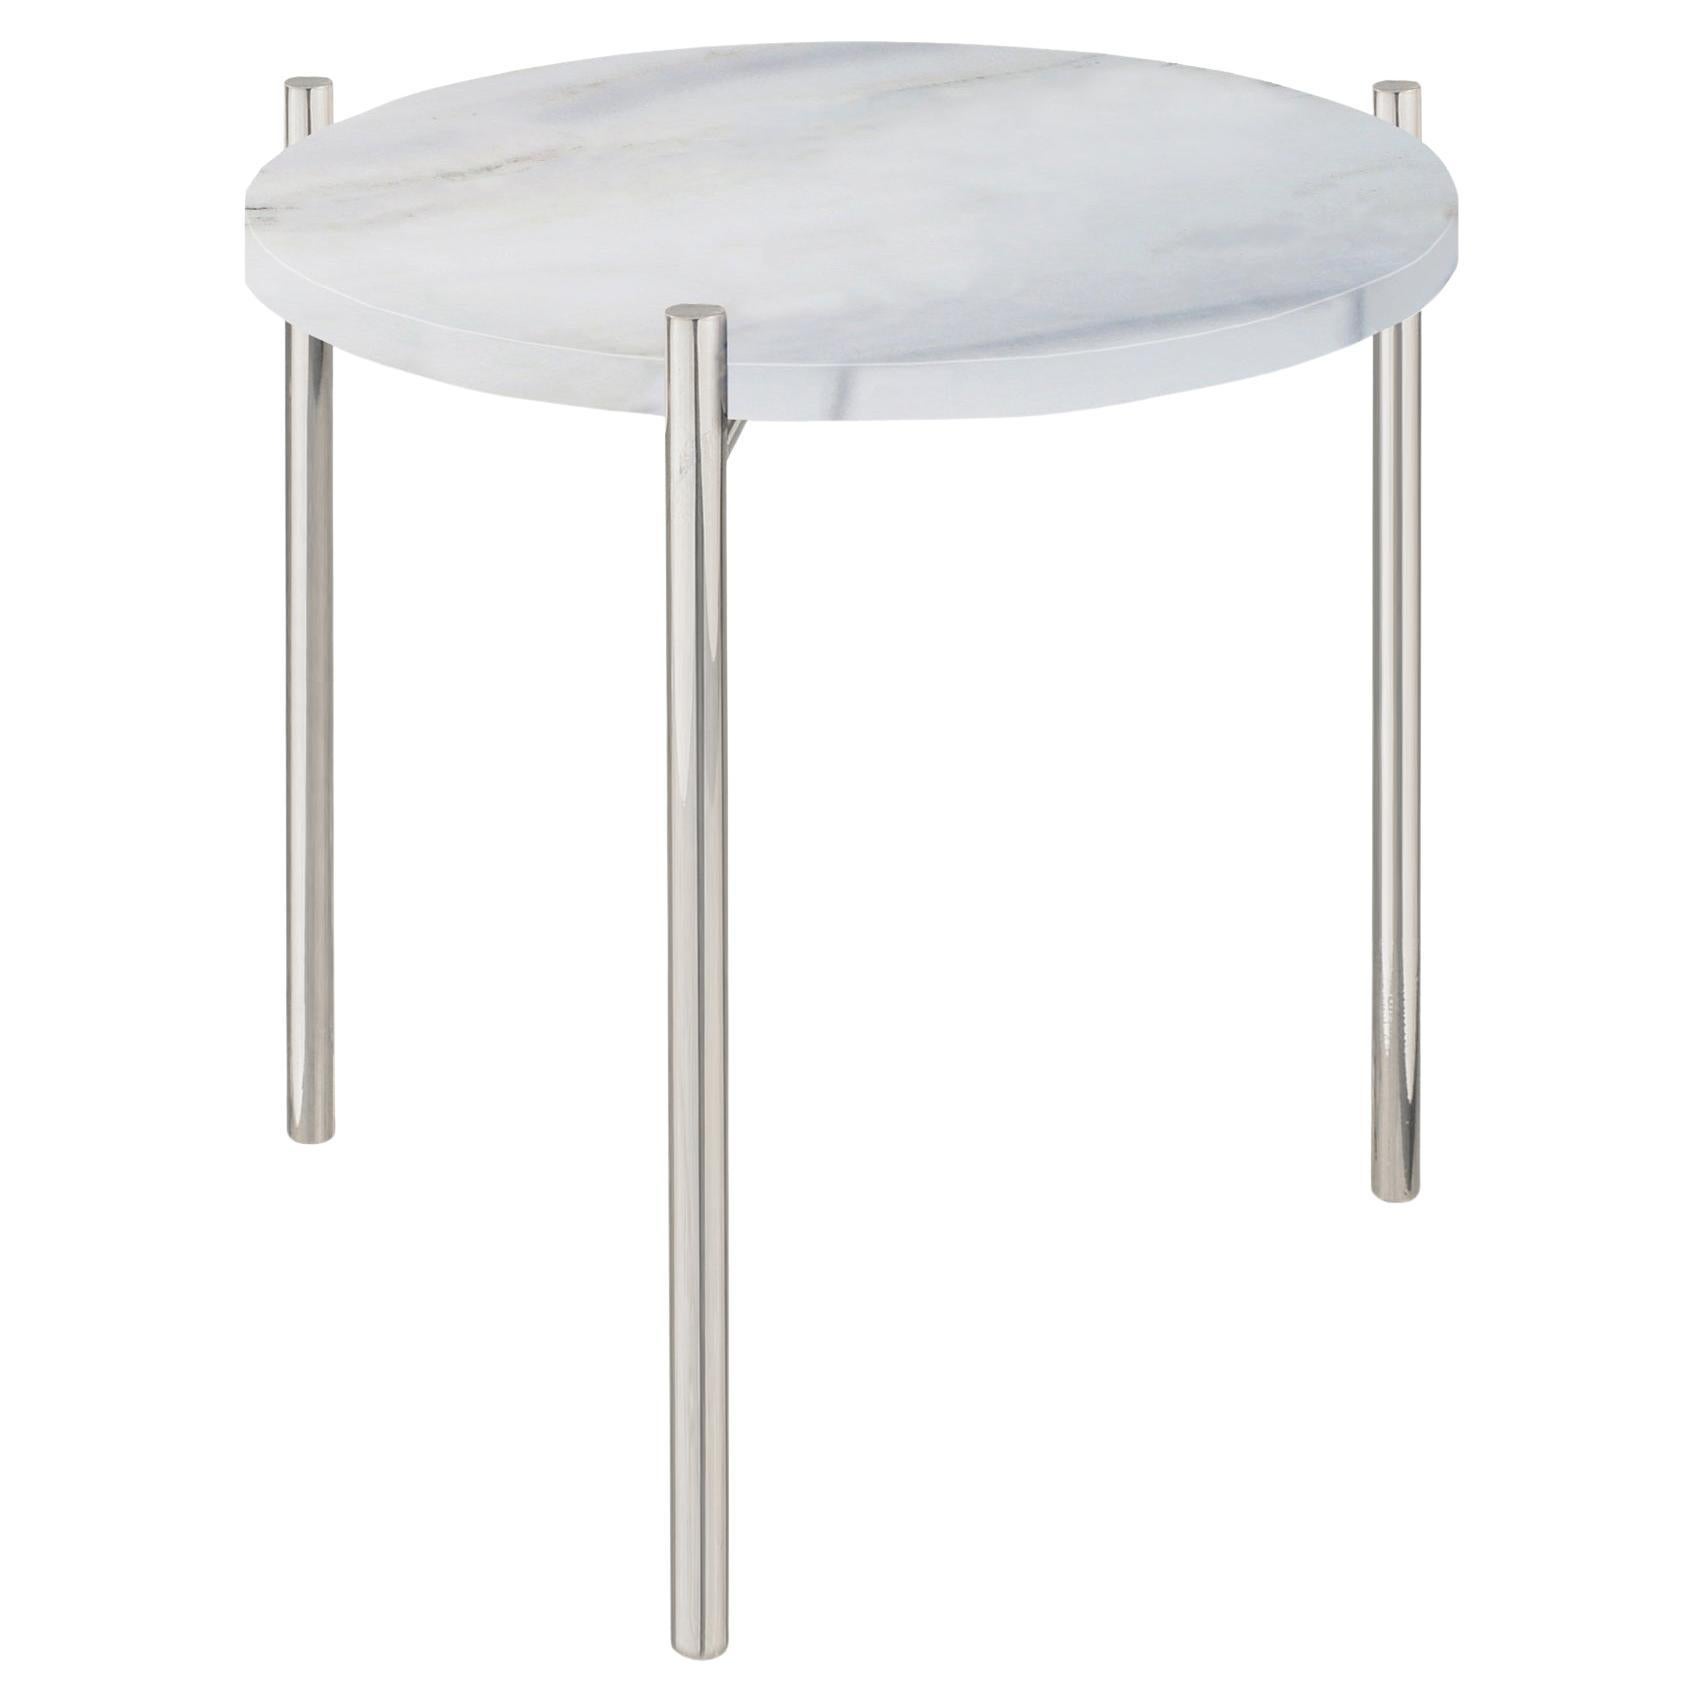 Pair of White Marble Stainless Steel Side Tables